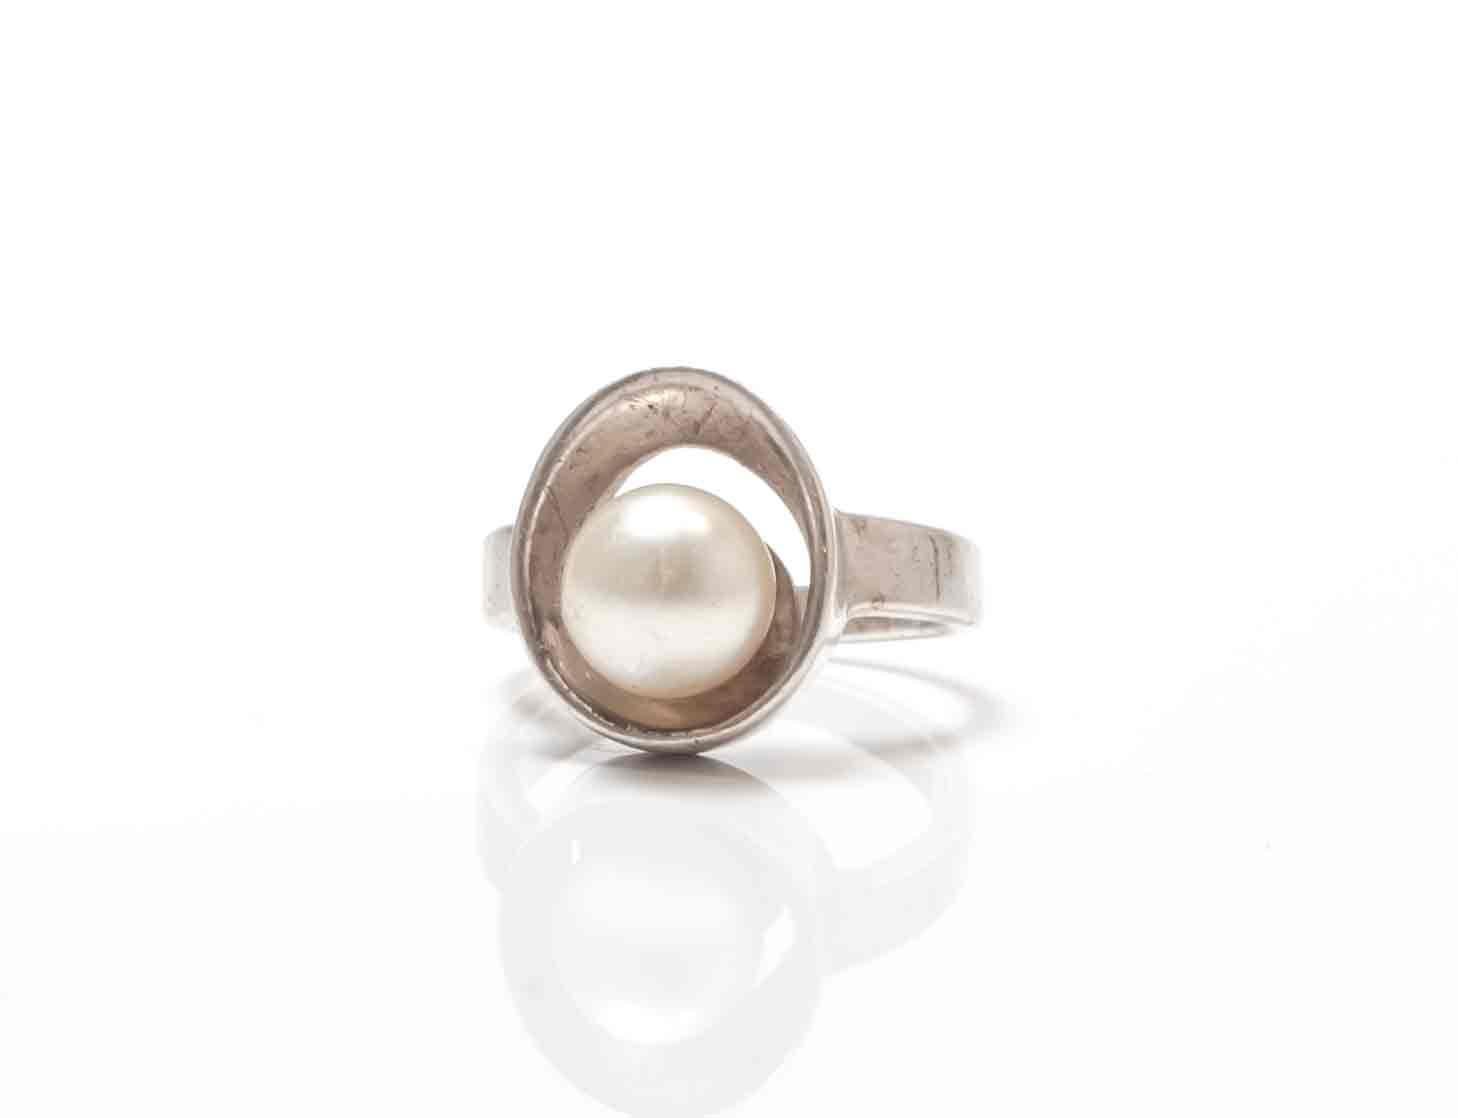 Sublime and skillfully designed vintage silver ring with a natural akoya pearl. Designed and made in Norway from ca 1960s second half.  The ring is in very good vintage condition with no structural imperfections. 